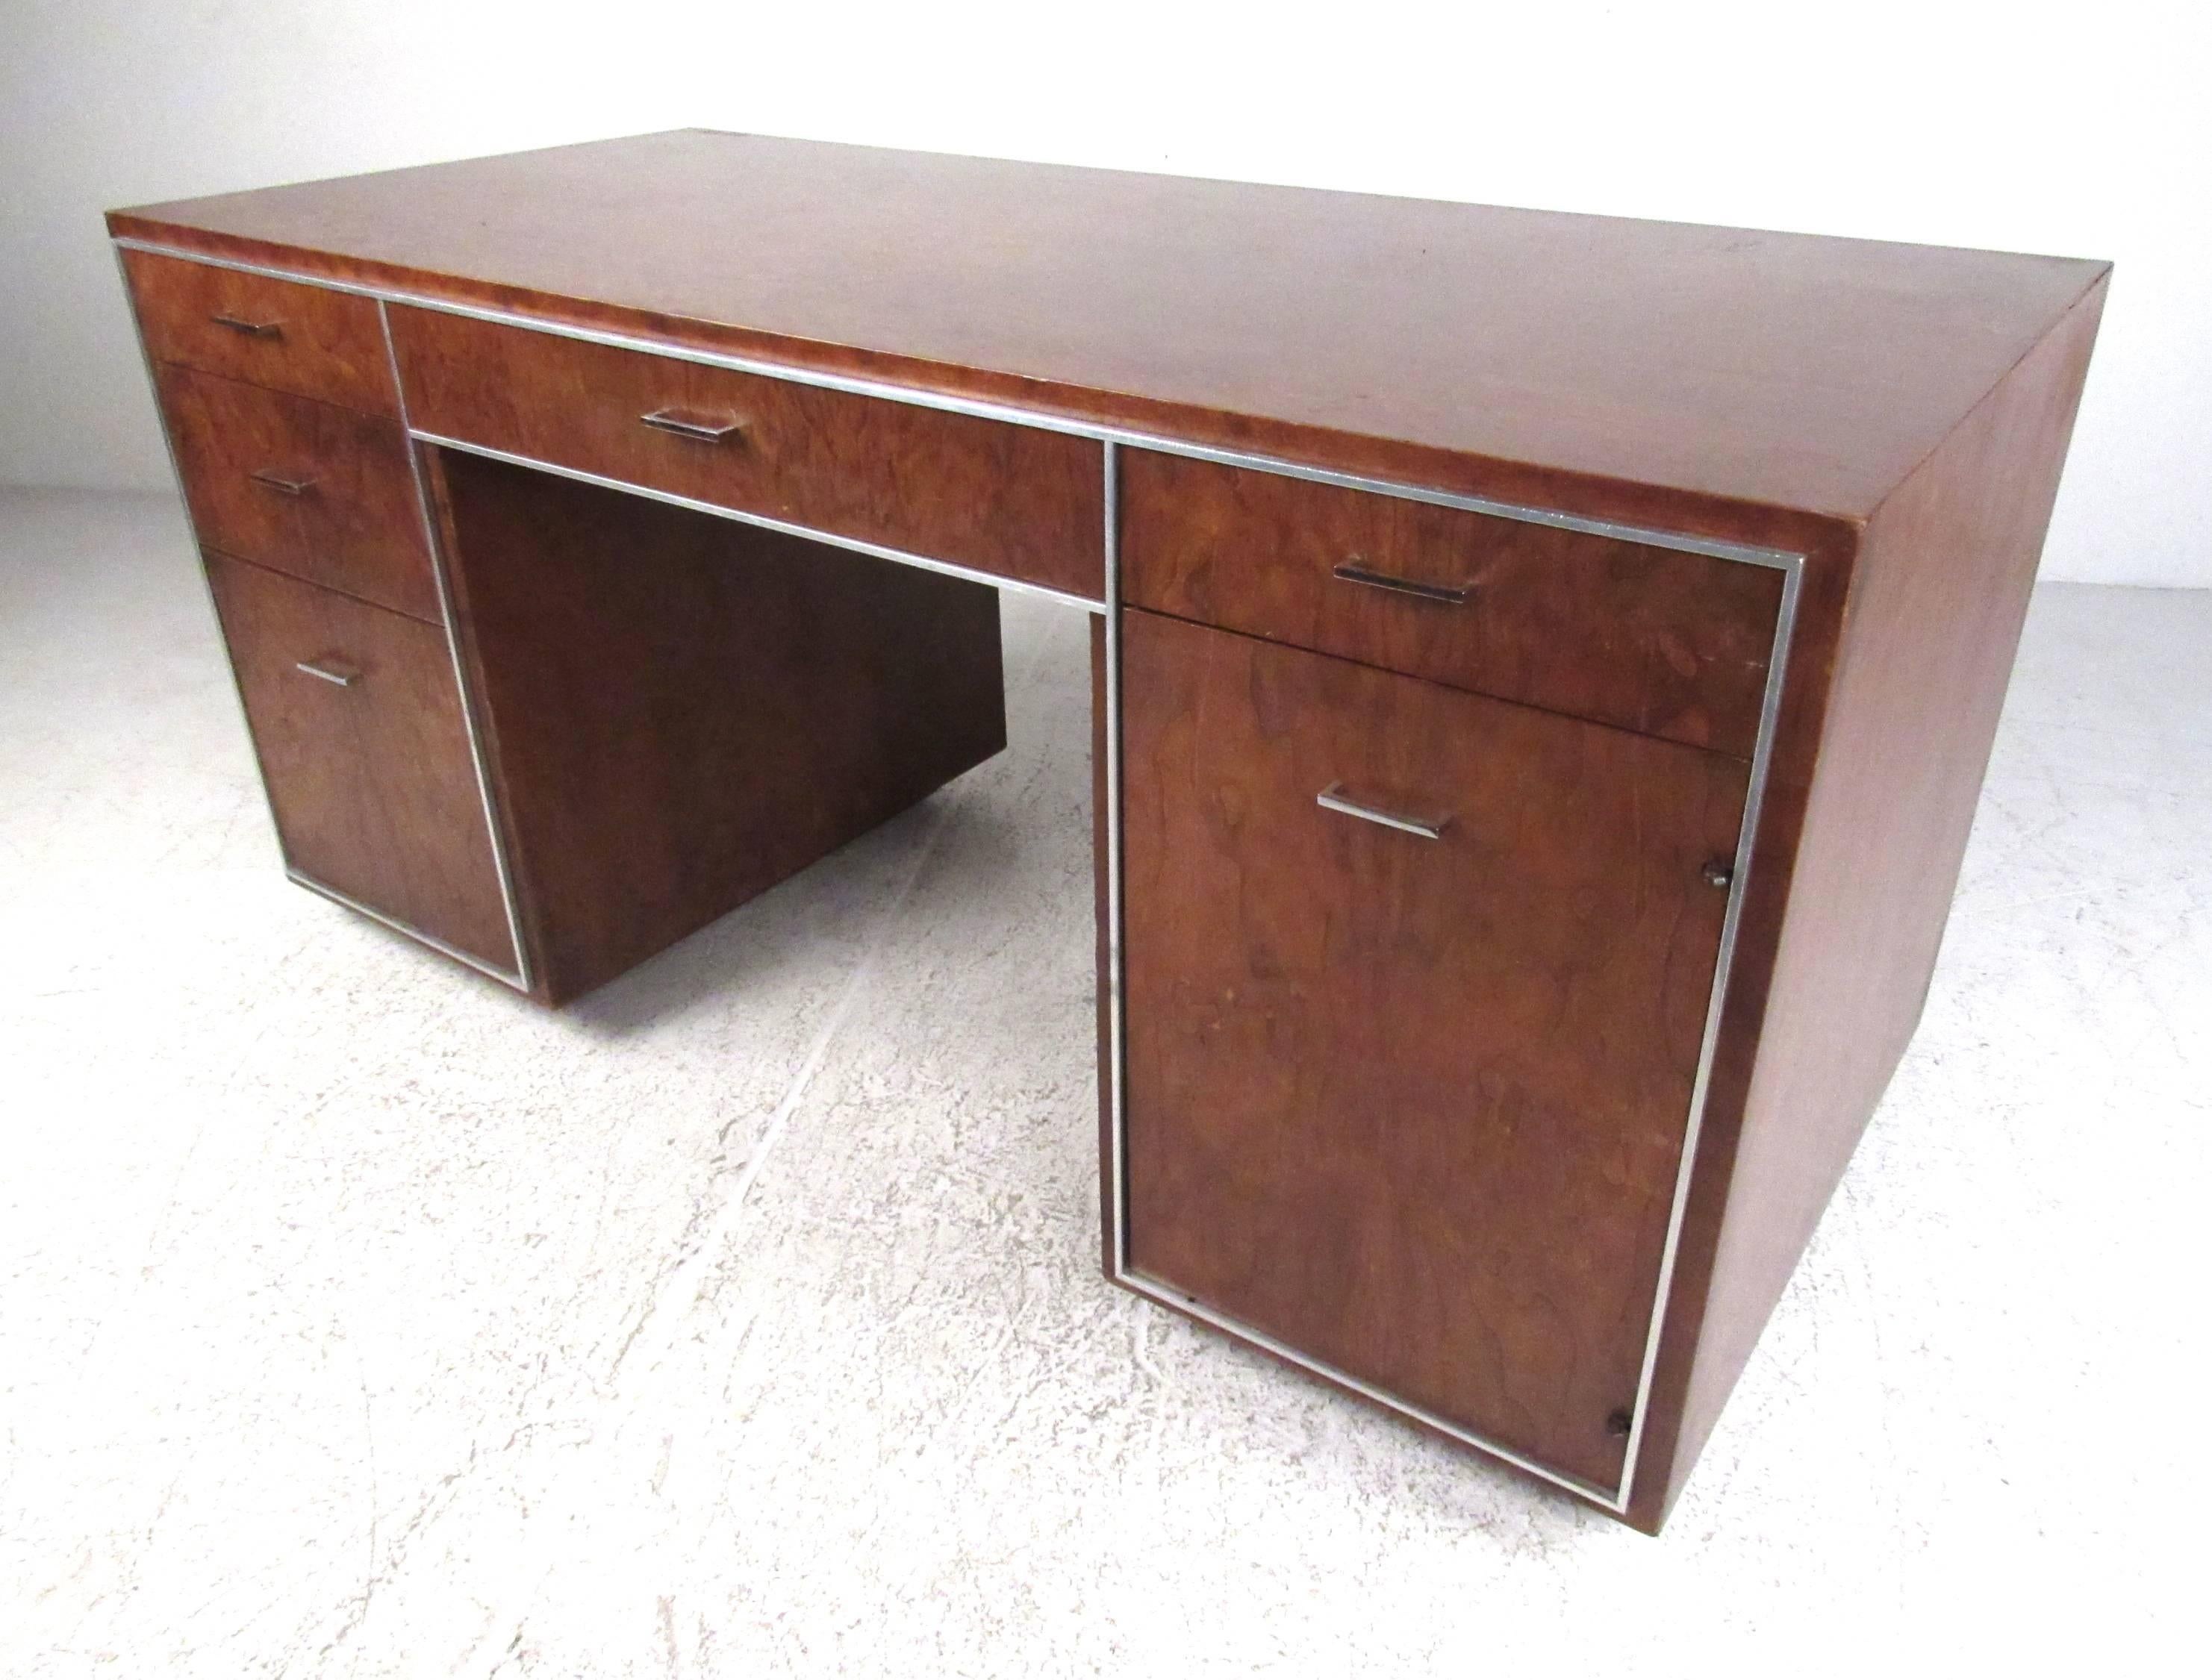 Attractive deep grain patterned walnut desk with simple lines accentuated by aluminum trim and matching drawer pulls. Designed for freestanding application with storage compartments on back side. Please confirm item location (NY or NJ) with dealer.
